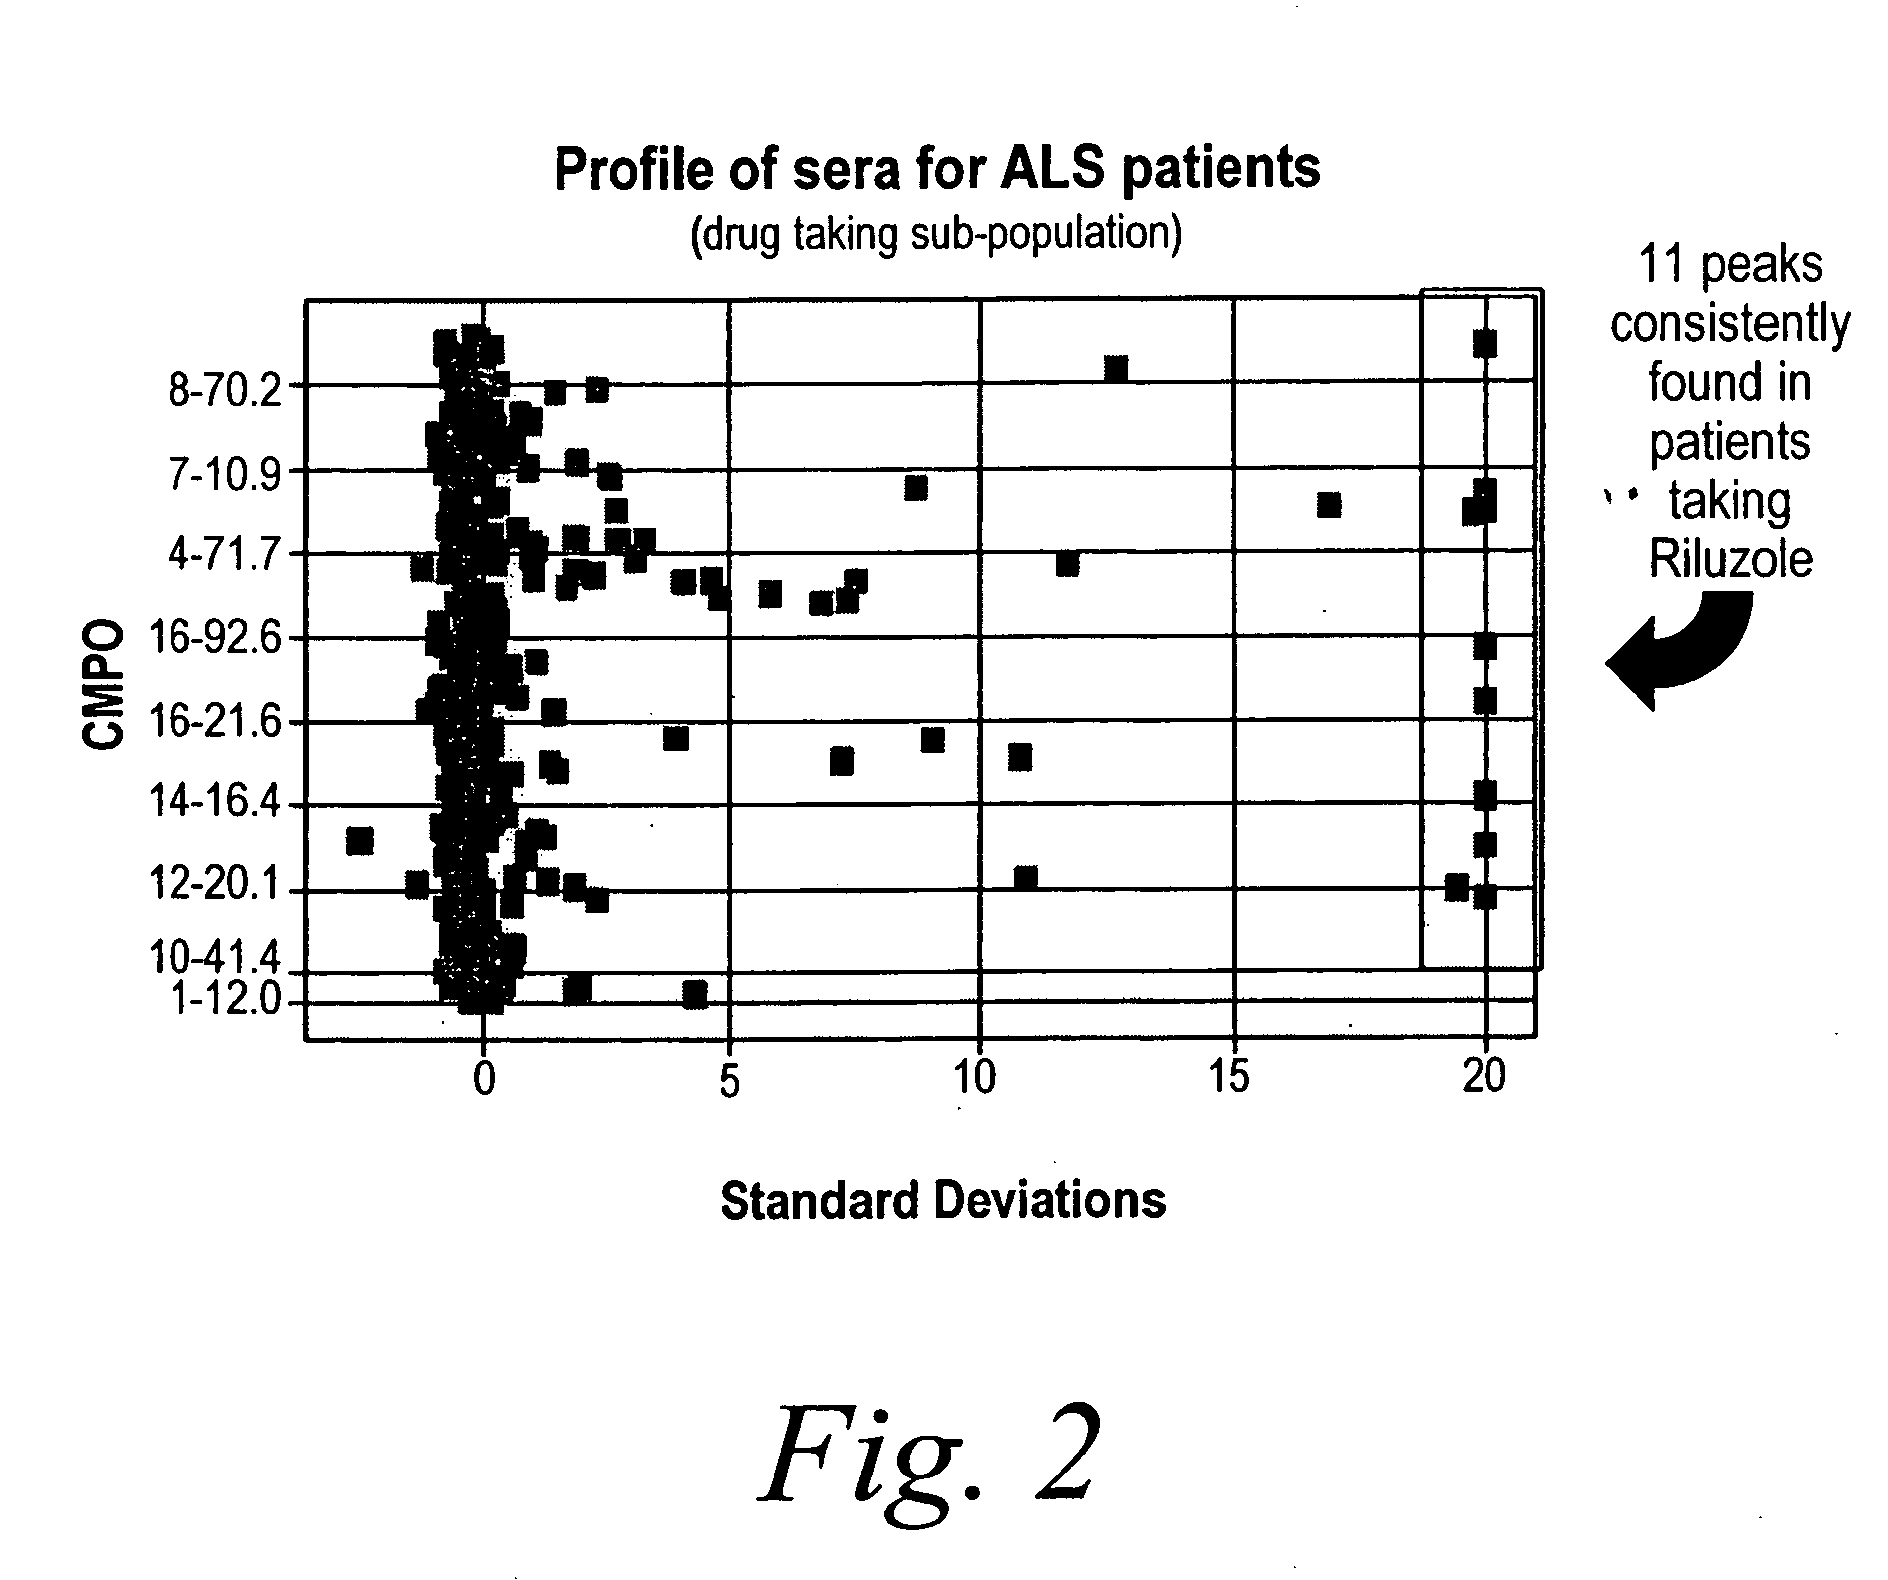 Methods for drug discovery, disease treatment, and diagnosis using metabolomics